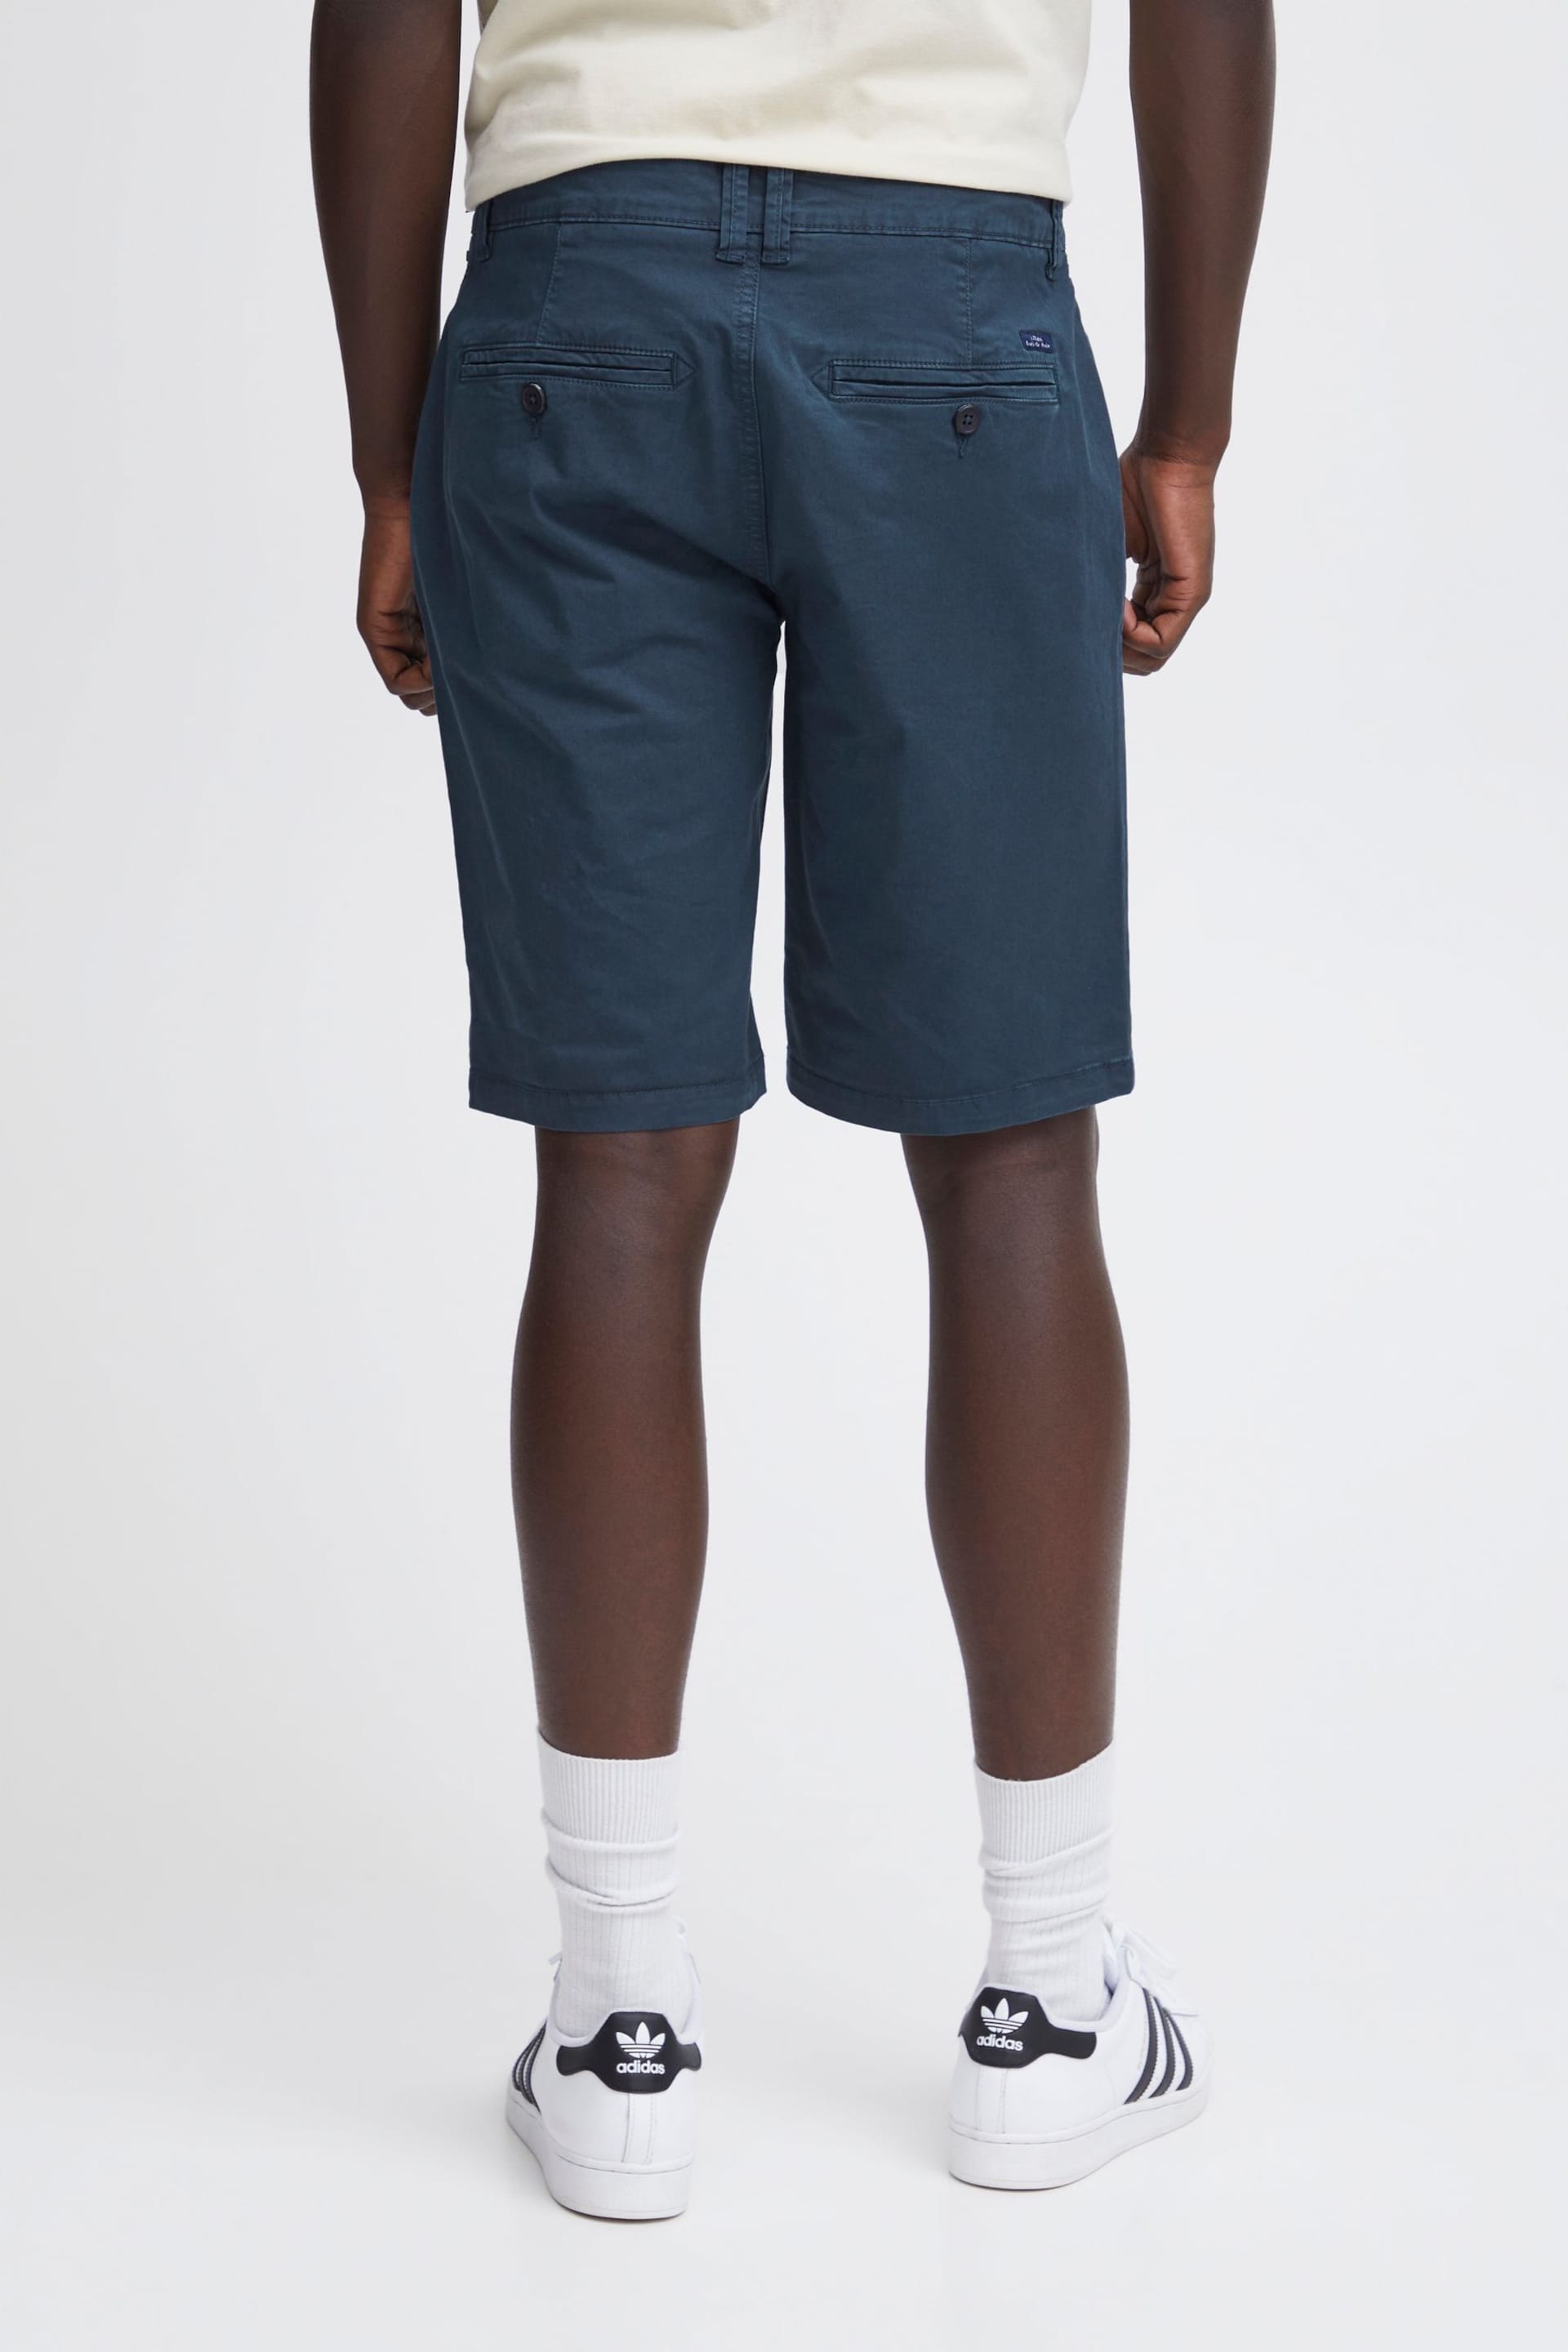 Blend Blue Stretch Chino Shorts - Image 2 of 5